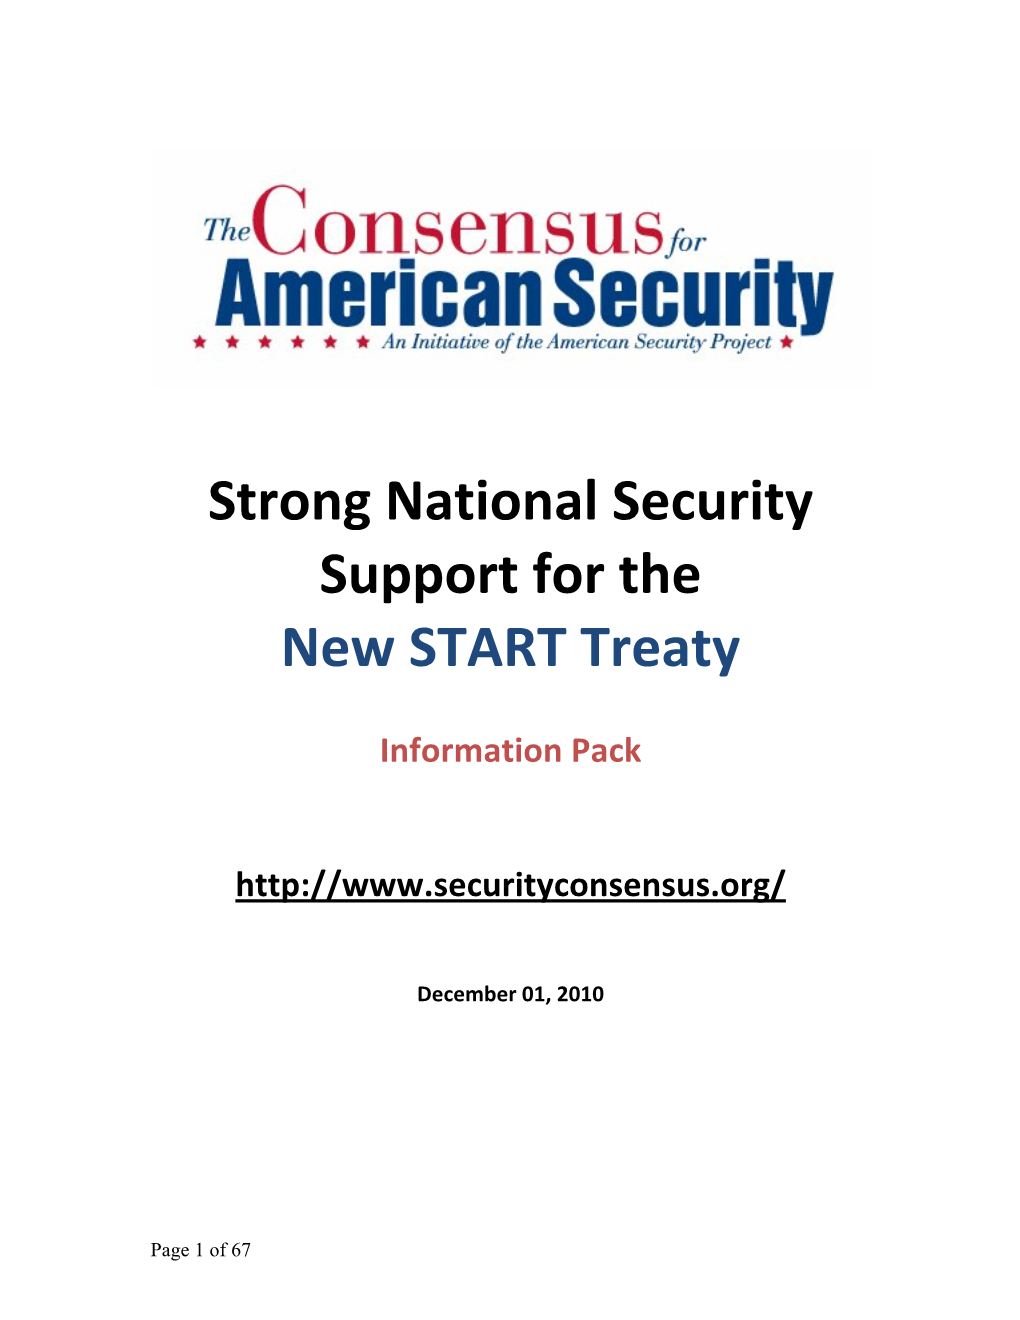 Strong National Security Support for the New START Treaty